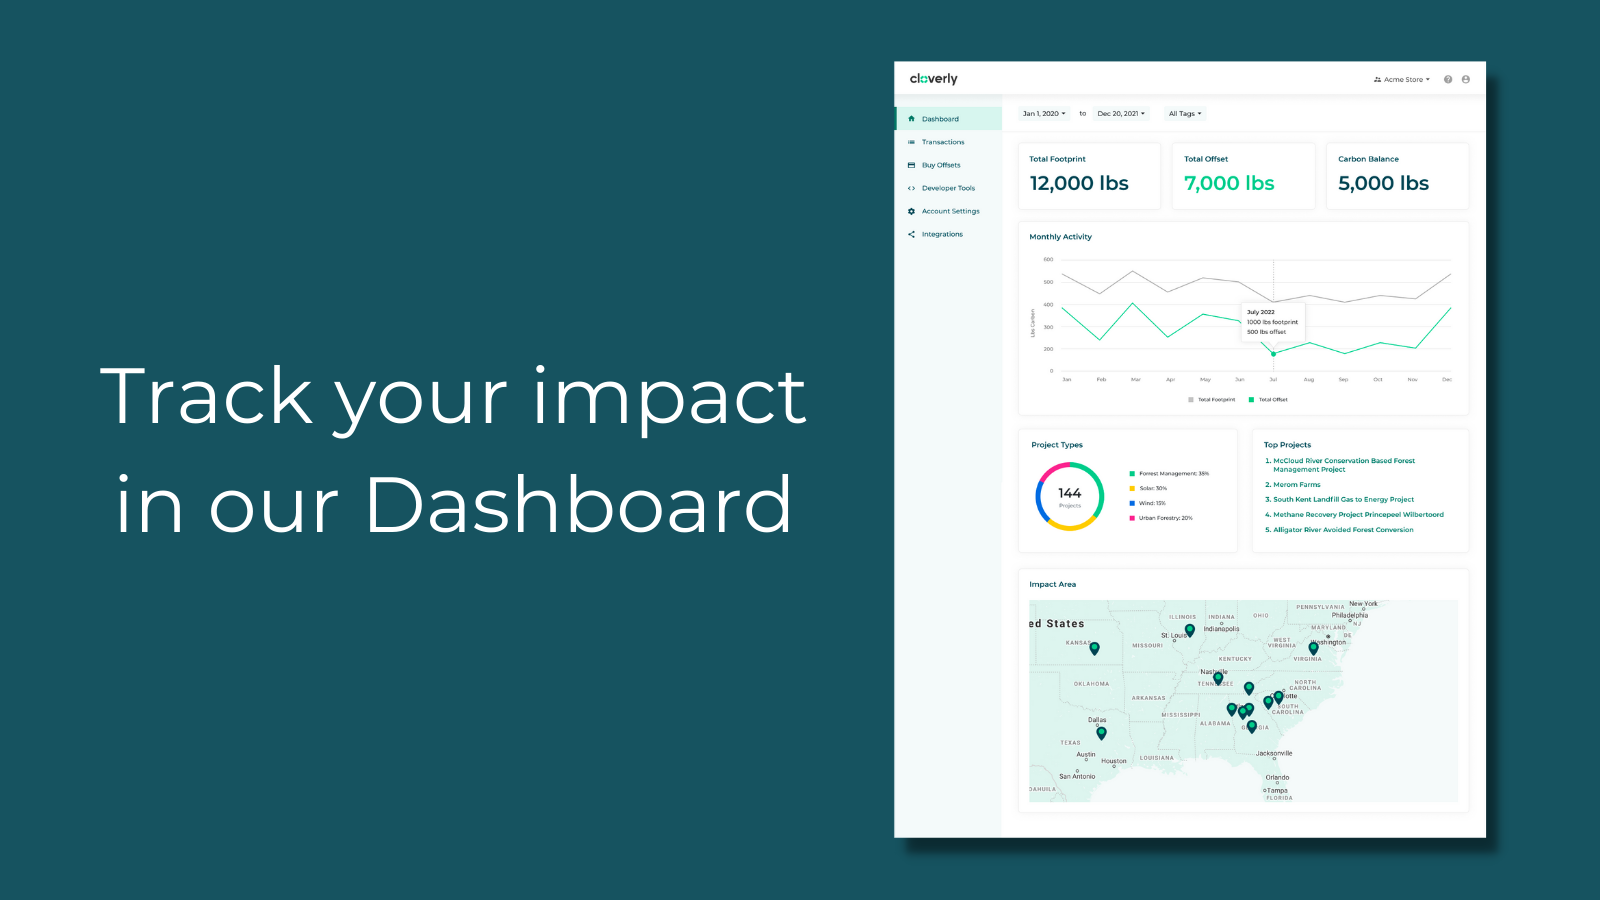 Track your impact in our Dashboard